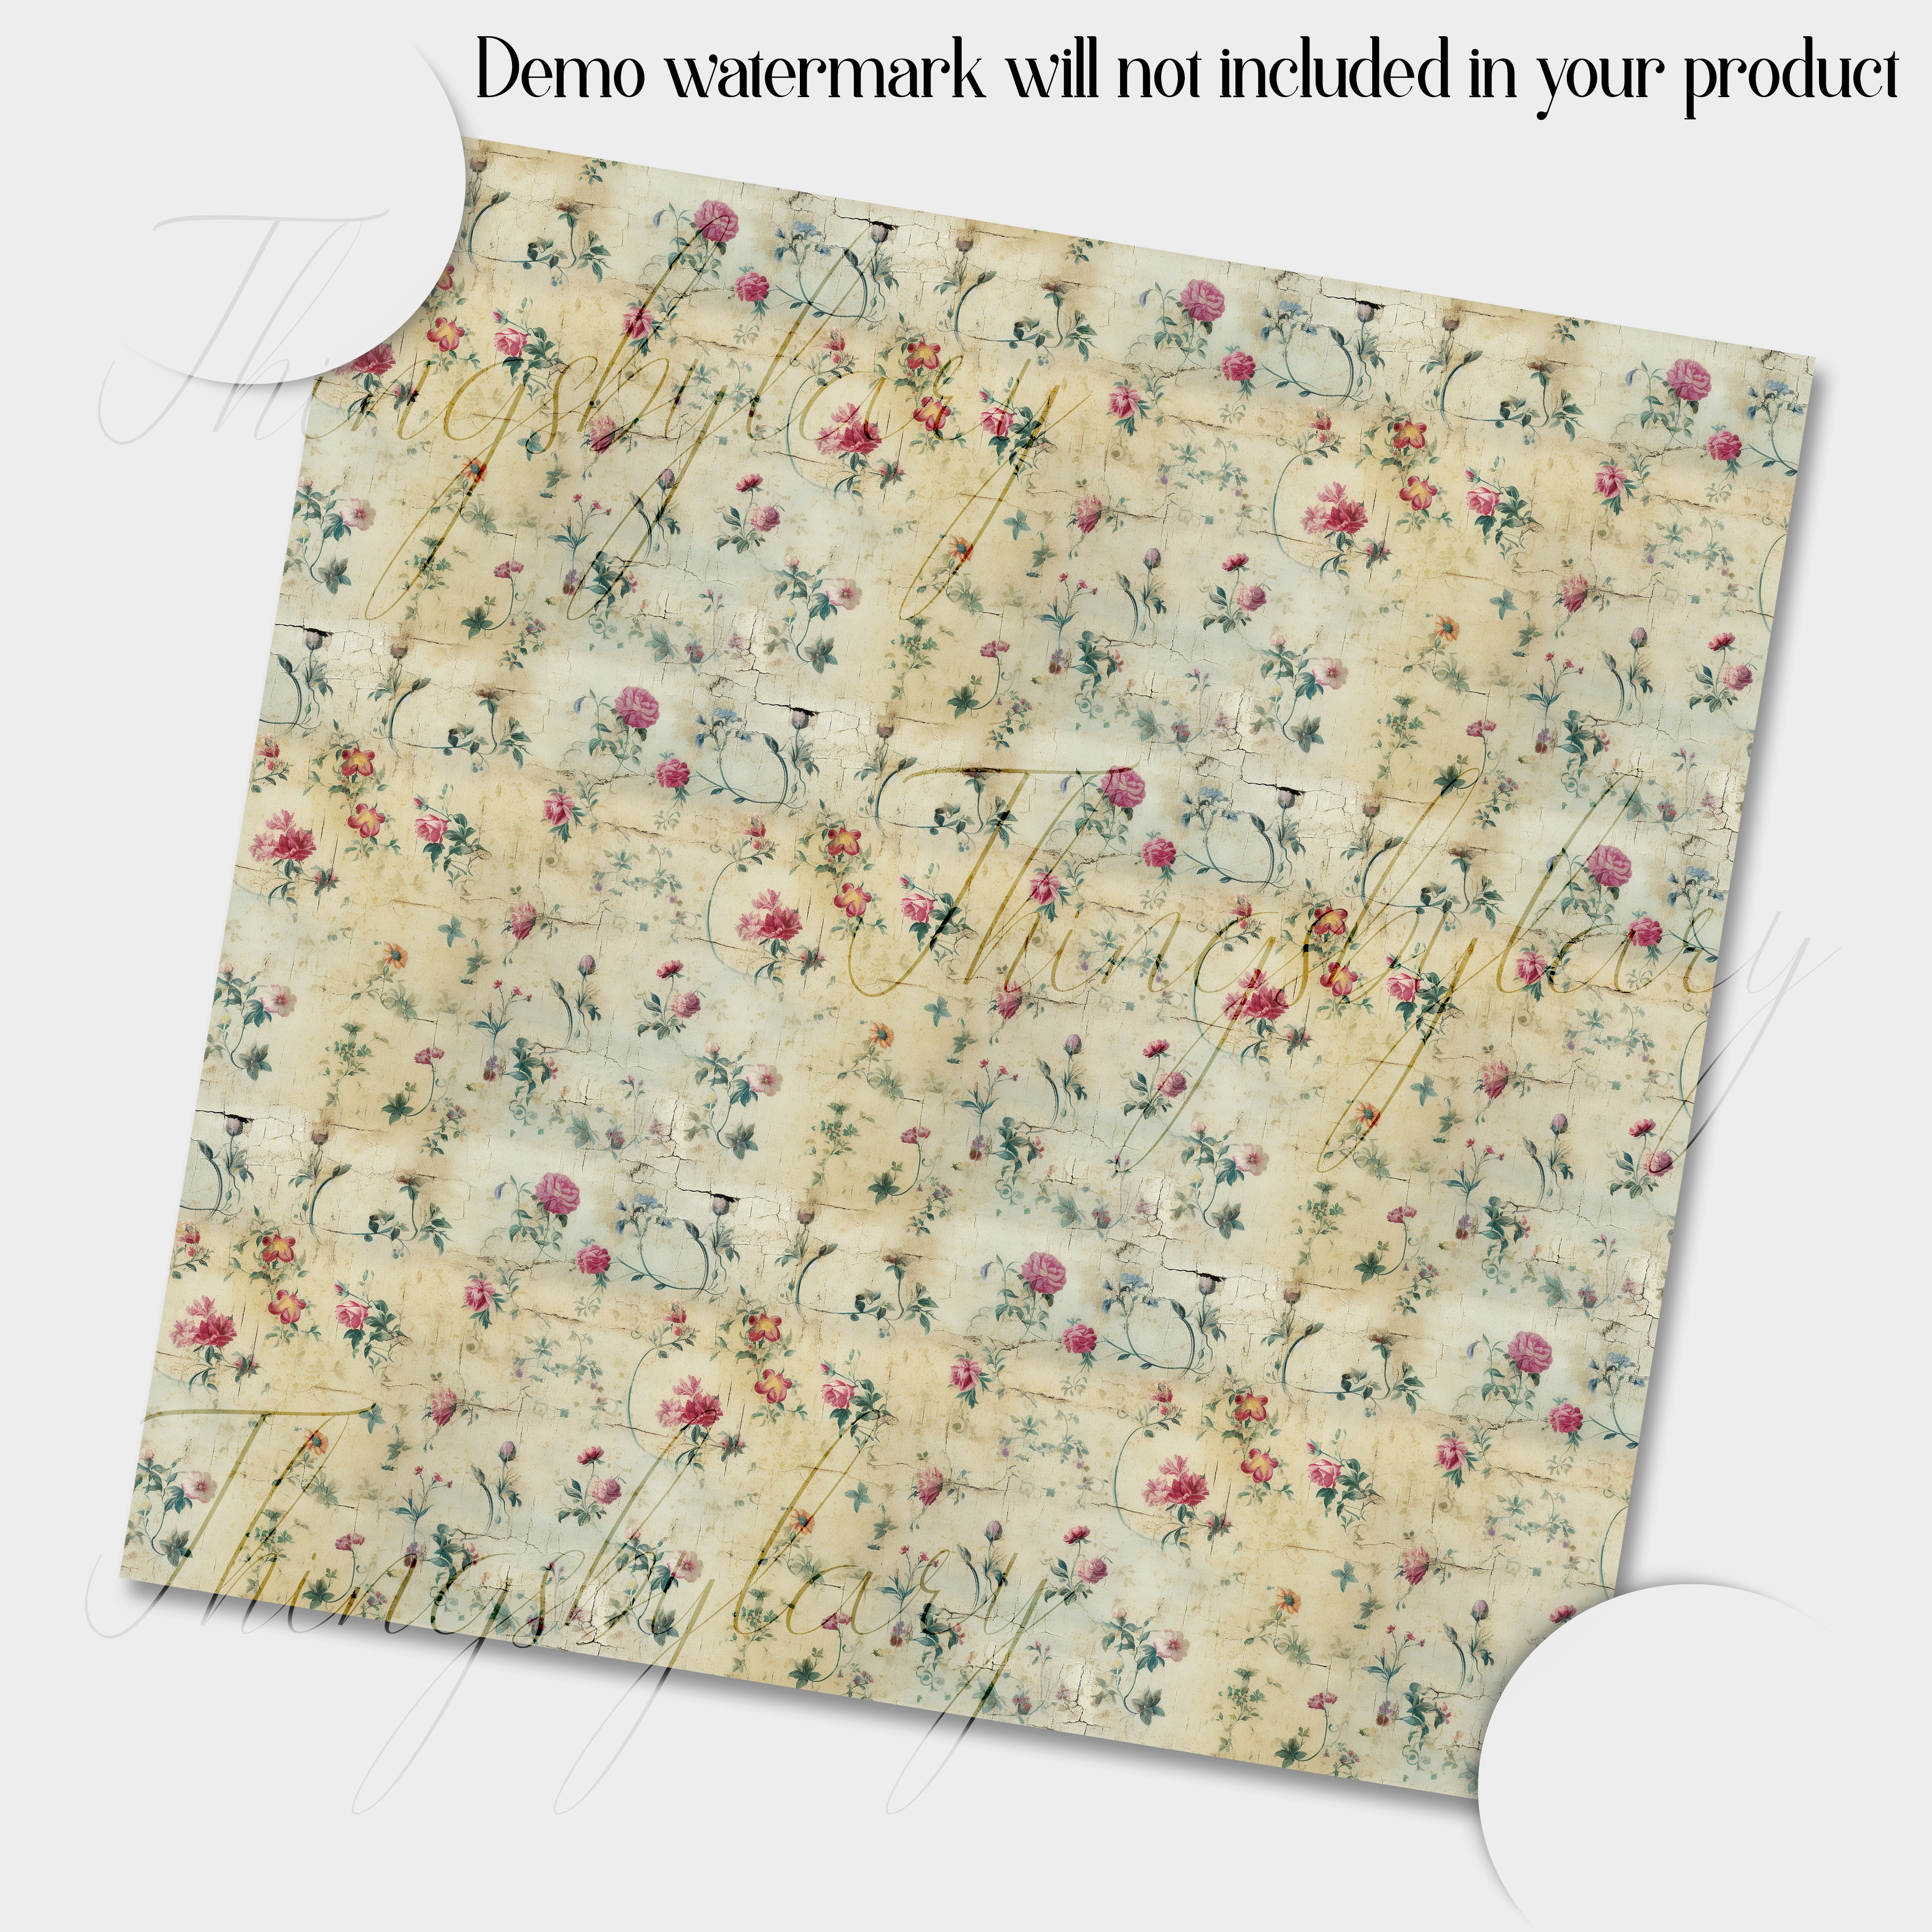 20 Seamless Vintage Decoupage Shabby Chic French design Ver 1 Digital Papers